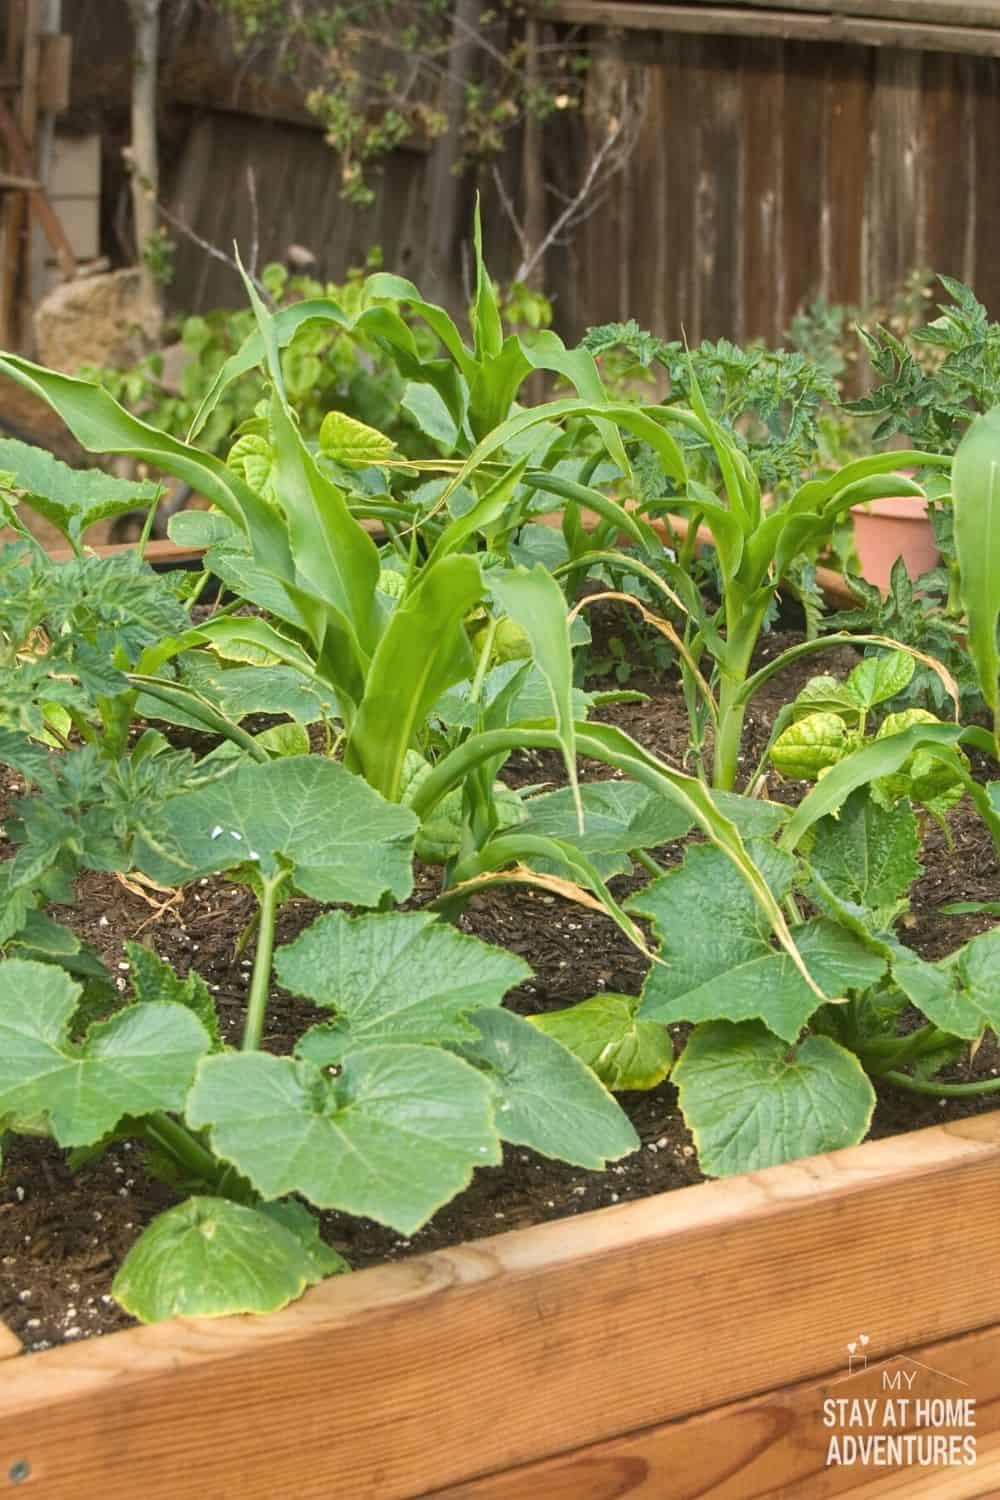 New to gardening? Learn how to build raised vegetable garden beds including what wood to use, how to build one for less than $15. via @mystayathome